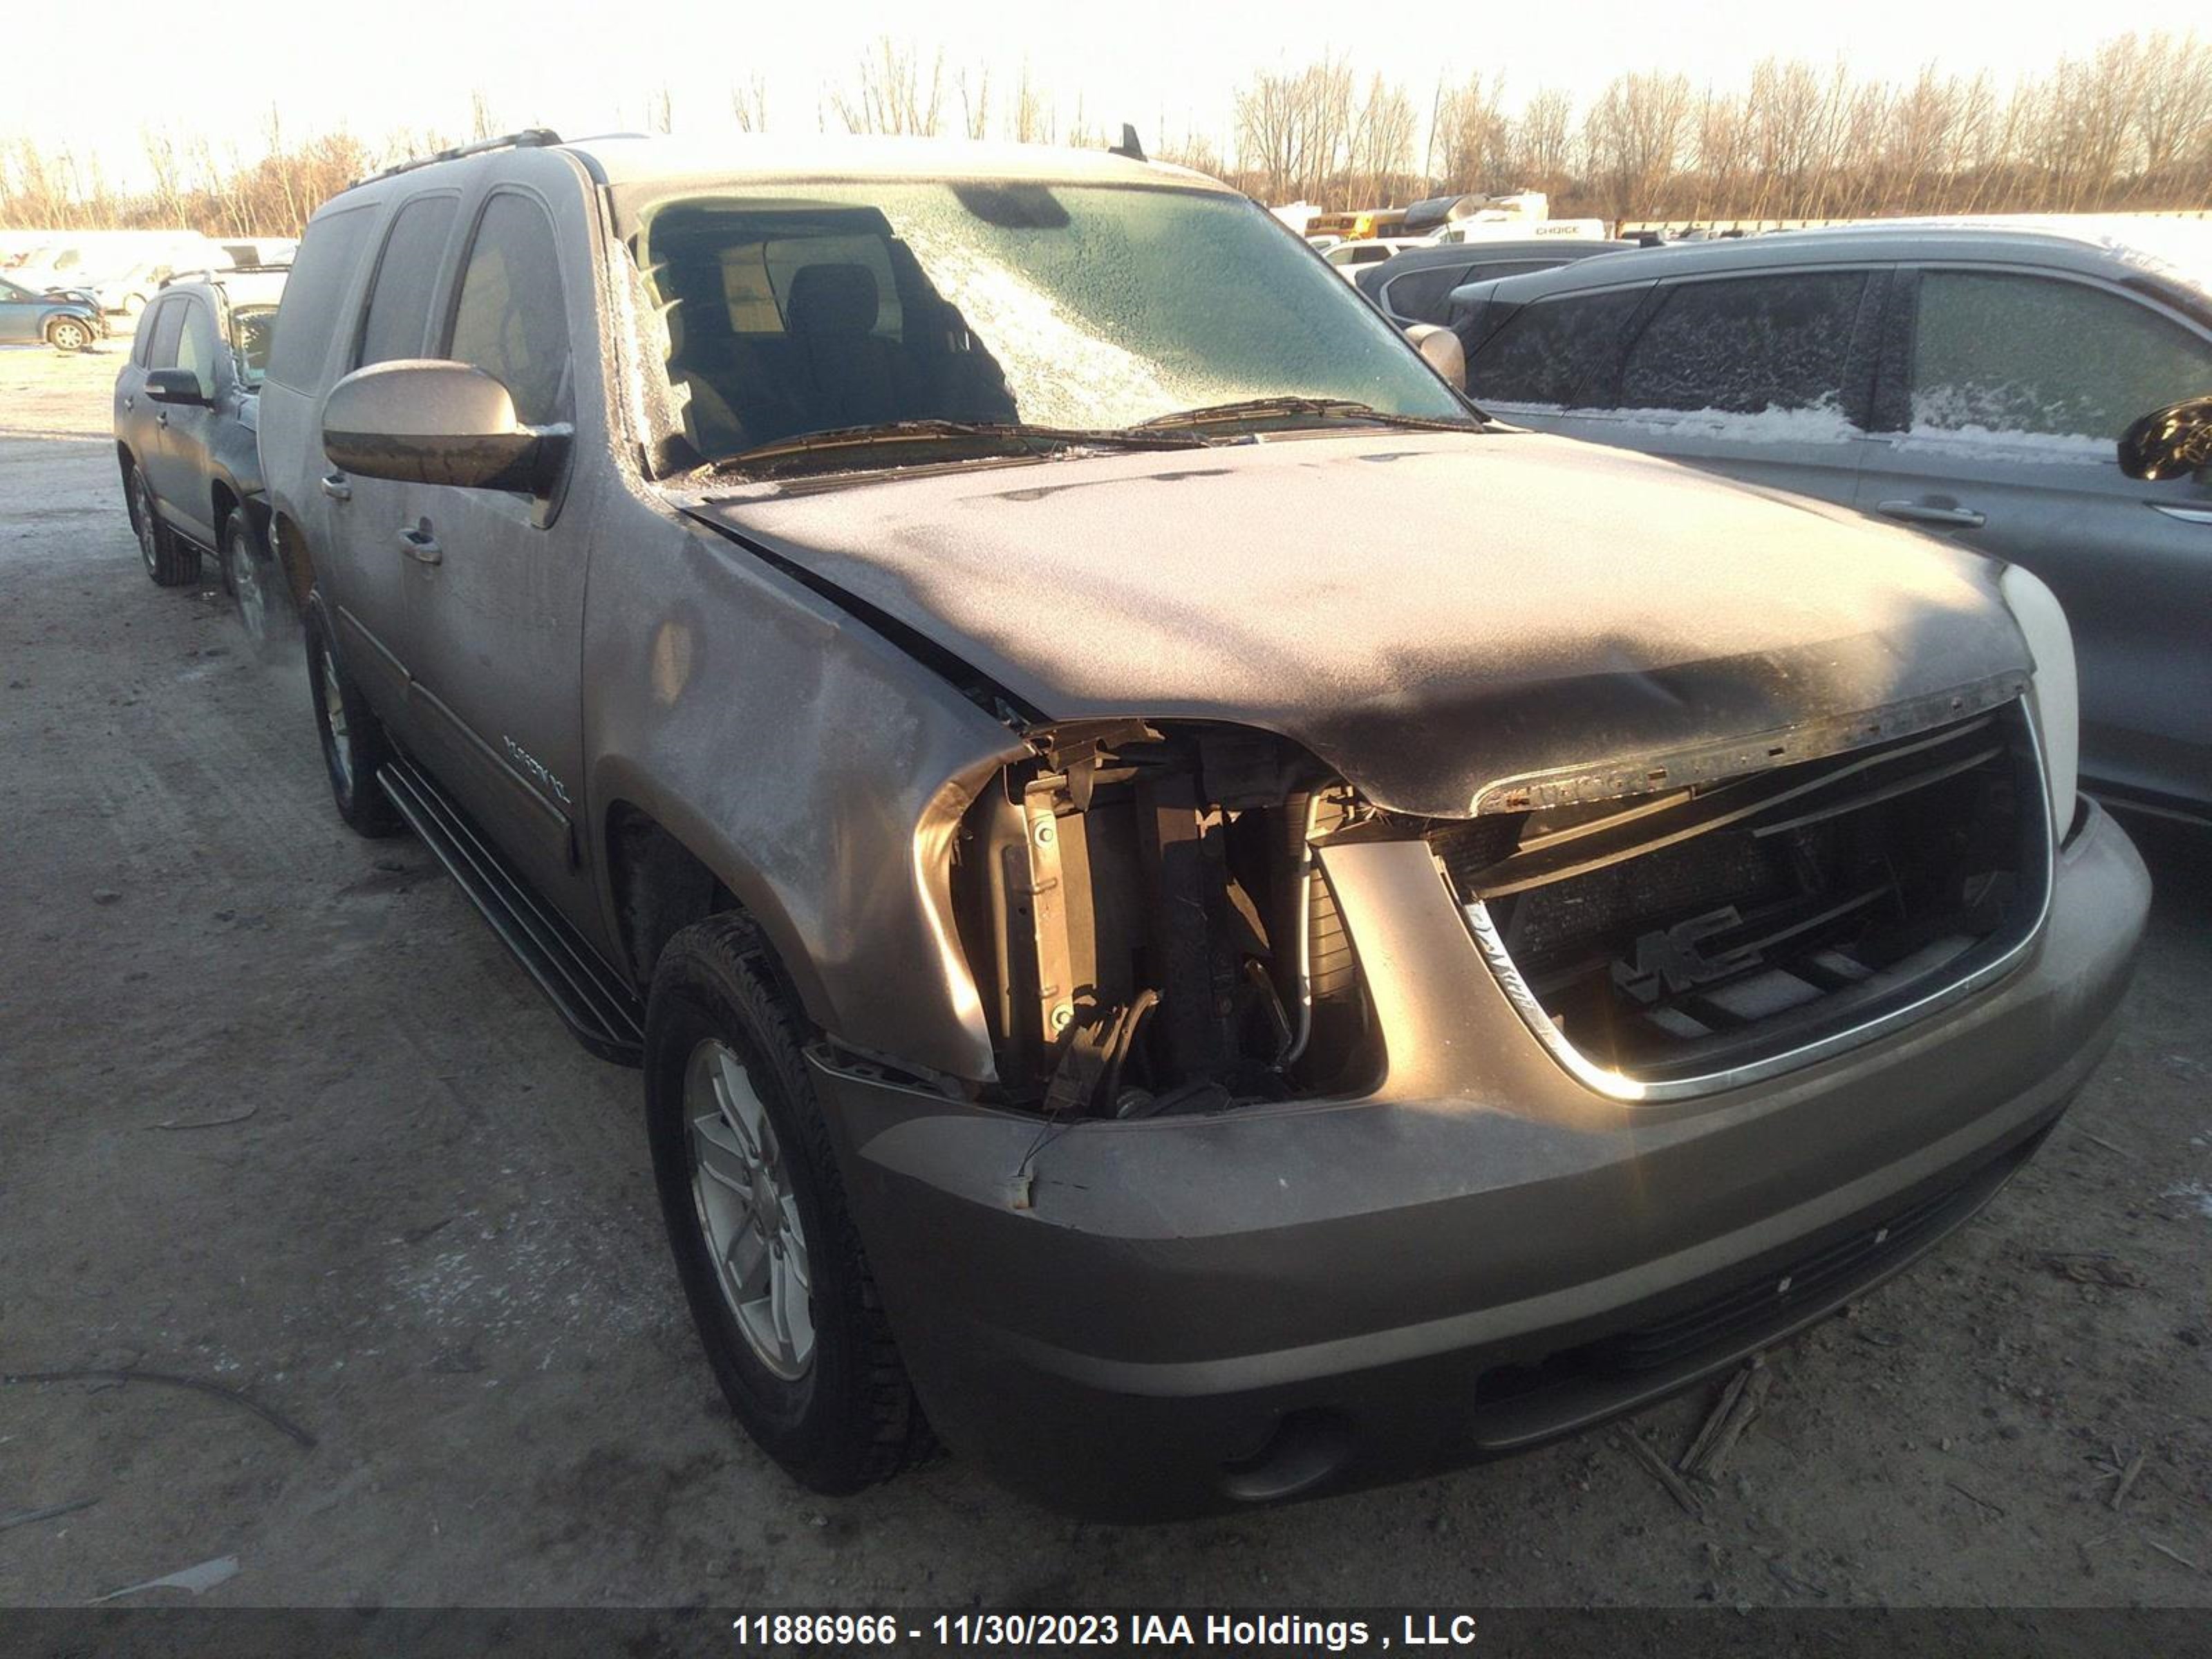 vin: 1GKS2HE71CR100538 1GKS2HE71CR100538 2012 gmc yukon 0 for Sale in n5w6b8, 1900 Gore Road , London, Ontario, USA